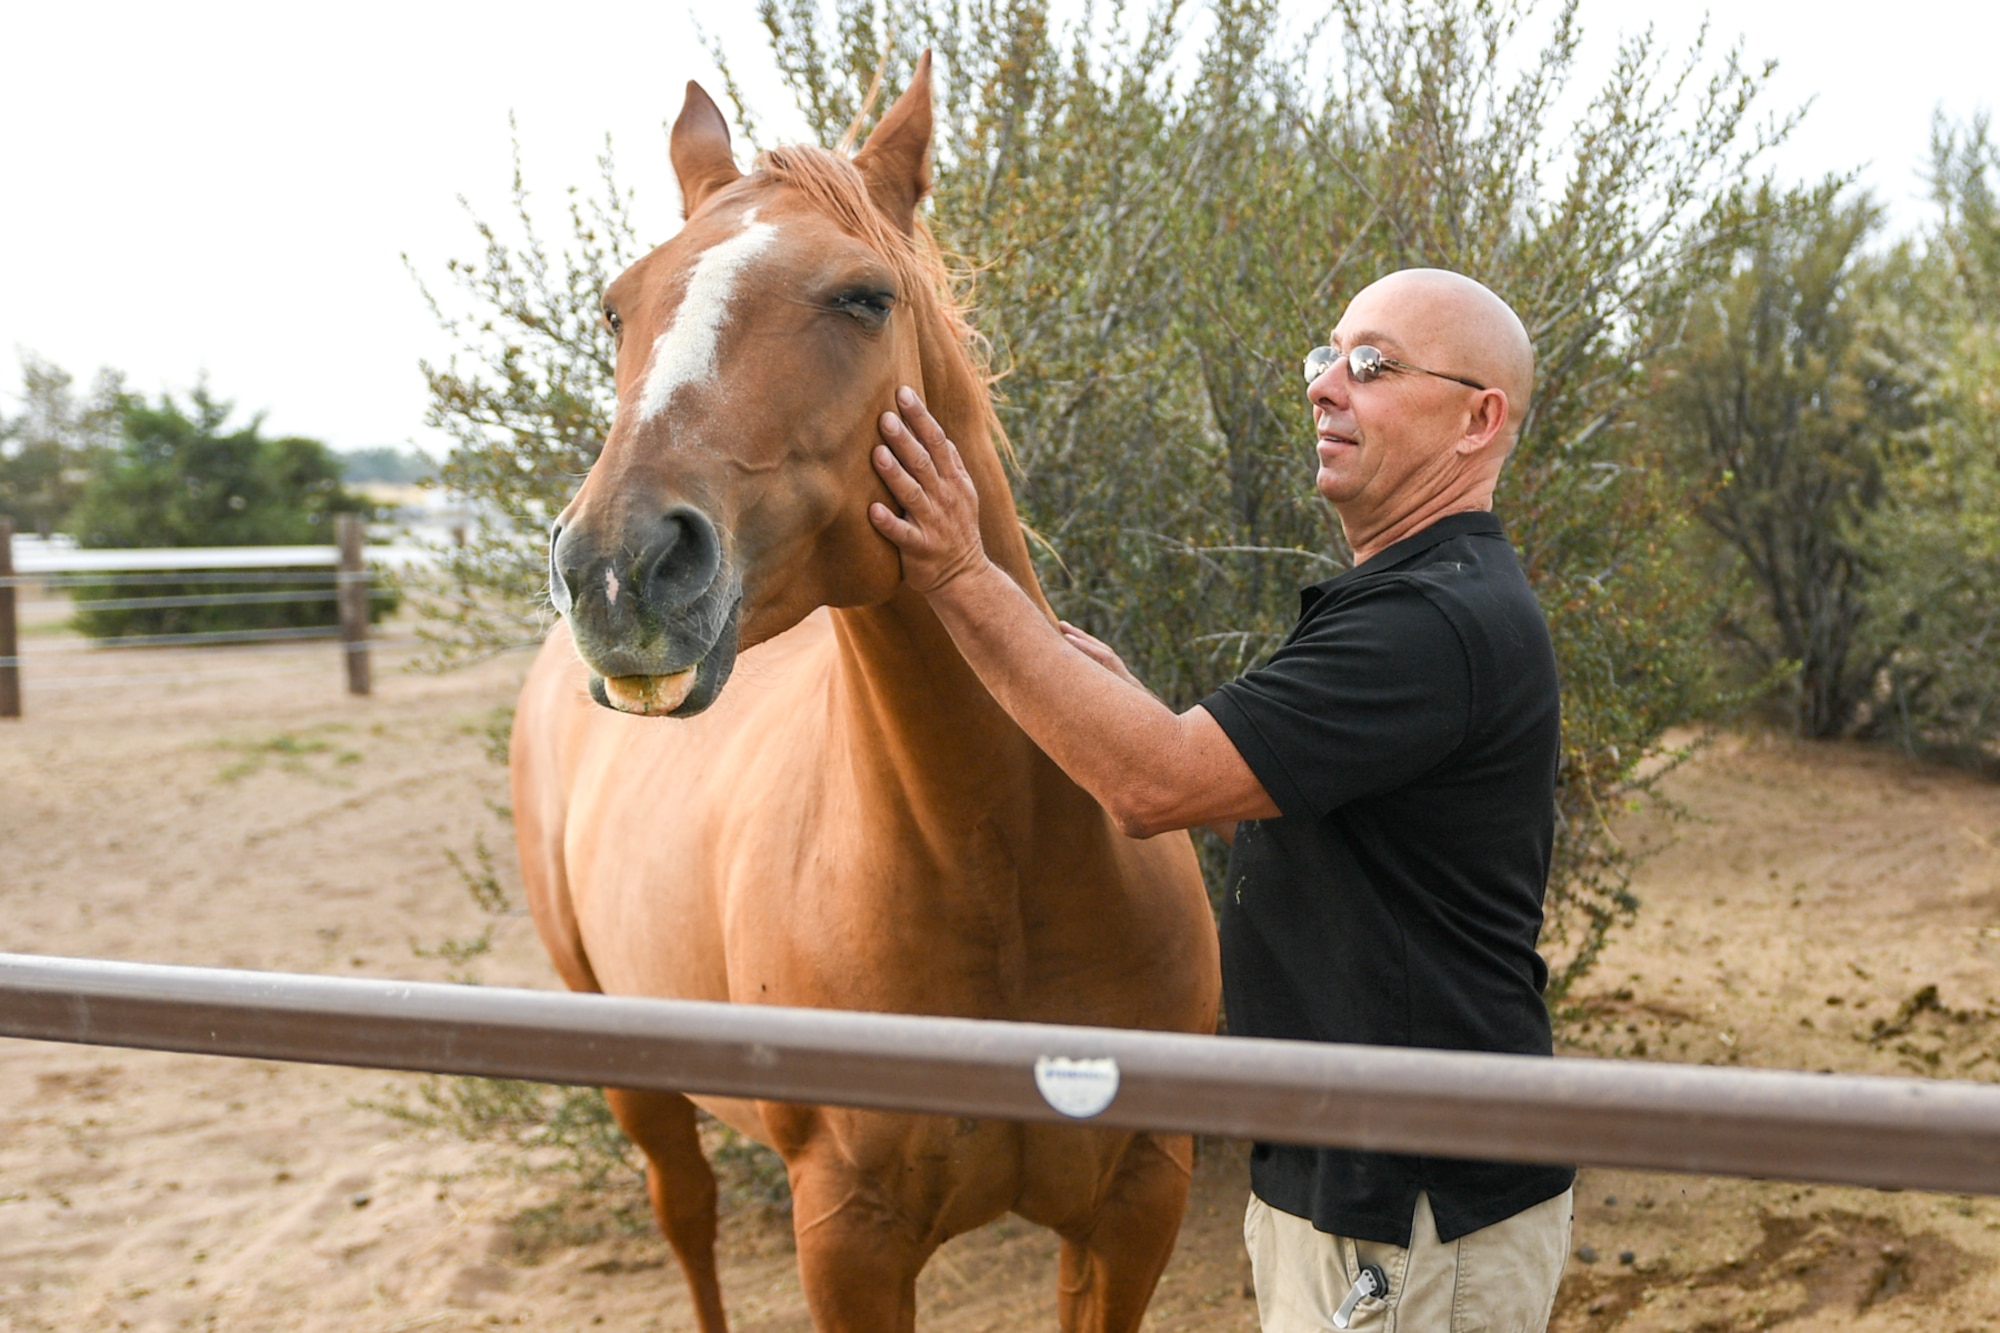 Sgt. 1st Class Ray Fleming, U.S. Army Recruiting in Ogden, boards his horse, Trigger, at the Outdoor Recreation horse stables on Hill Air Force Base. Fleming has been boarding his horse for 4 years. (U.S. Air Force photo by Cynthia Griggs)